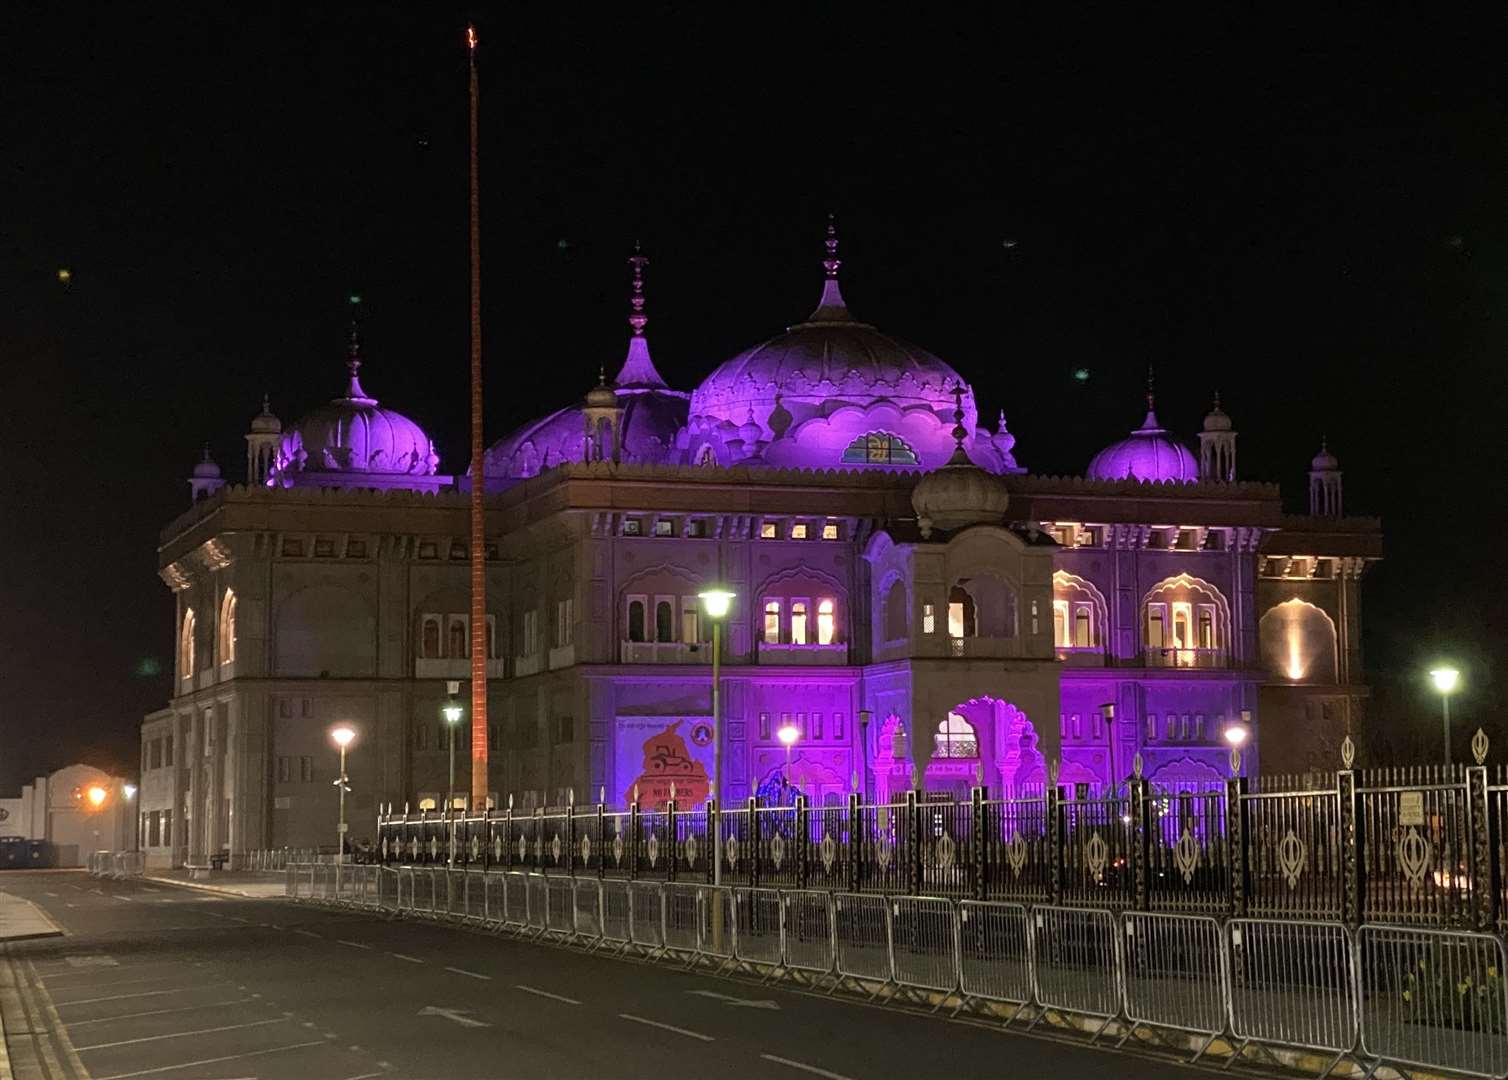 The Gravesend Gurdwara lit up purple for the census